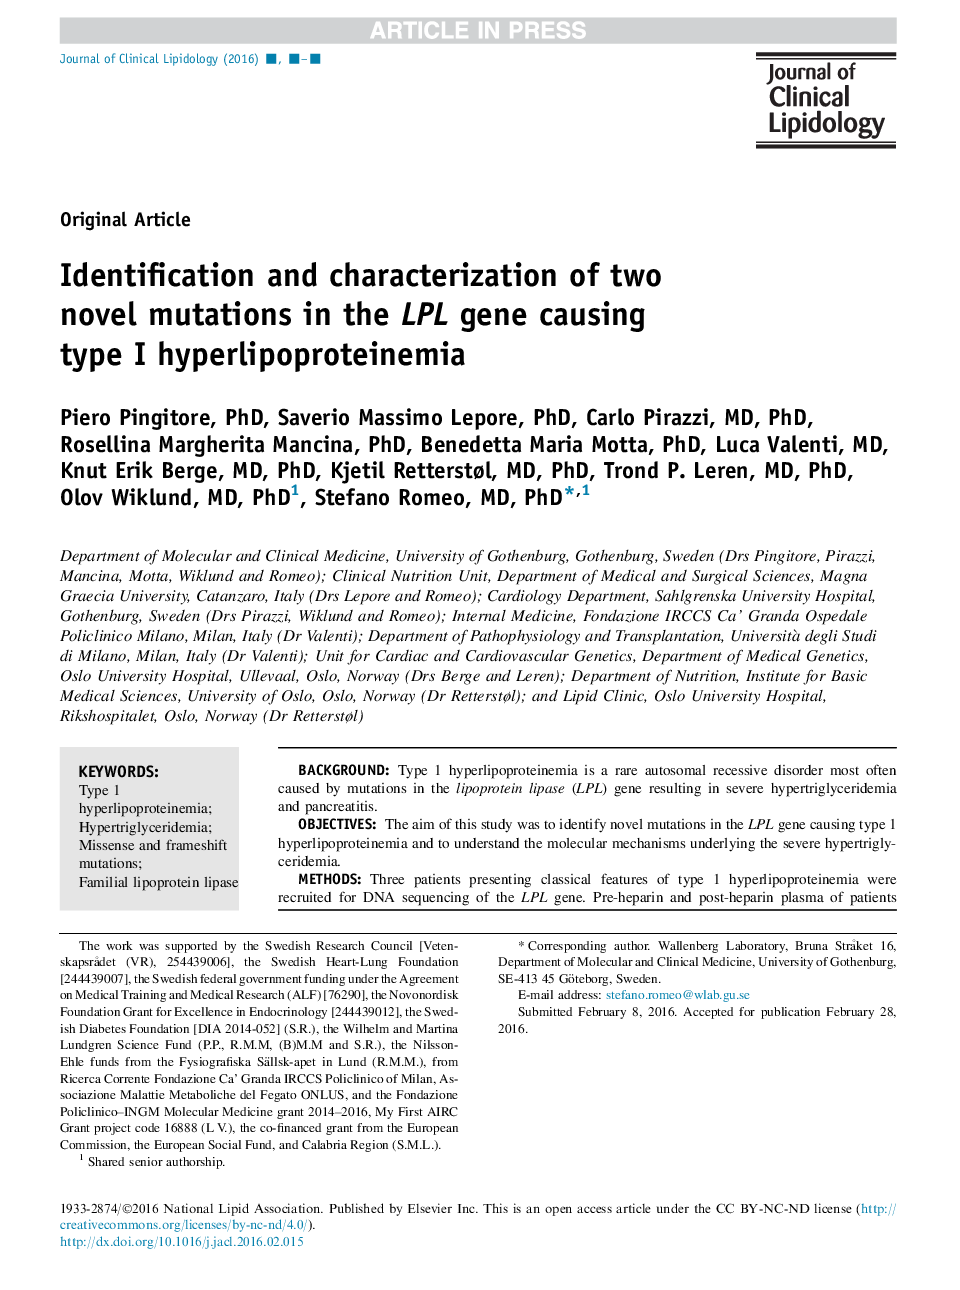 Identification and characterization of two novel mutations in the LPL gene causing type I hyperlipoproteinemia